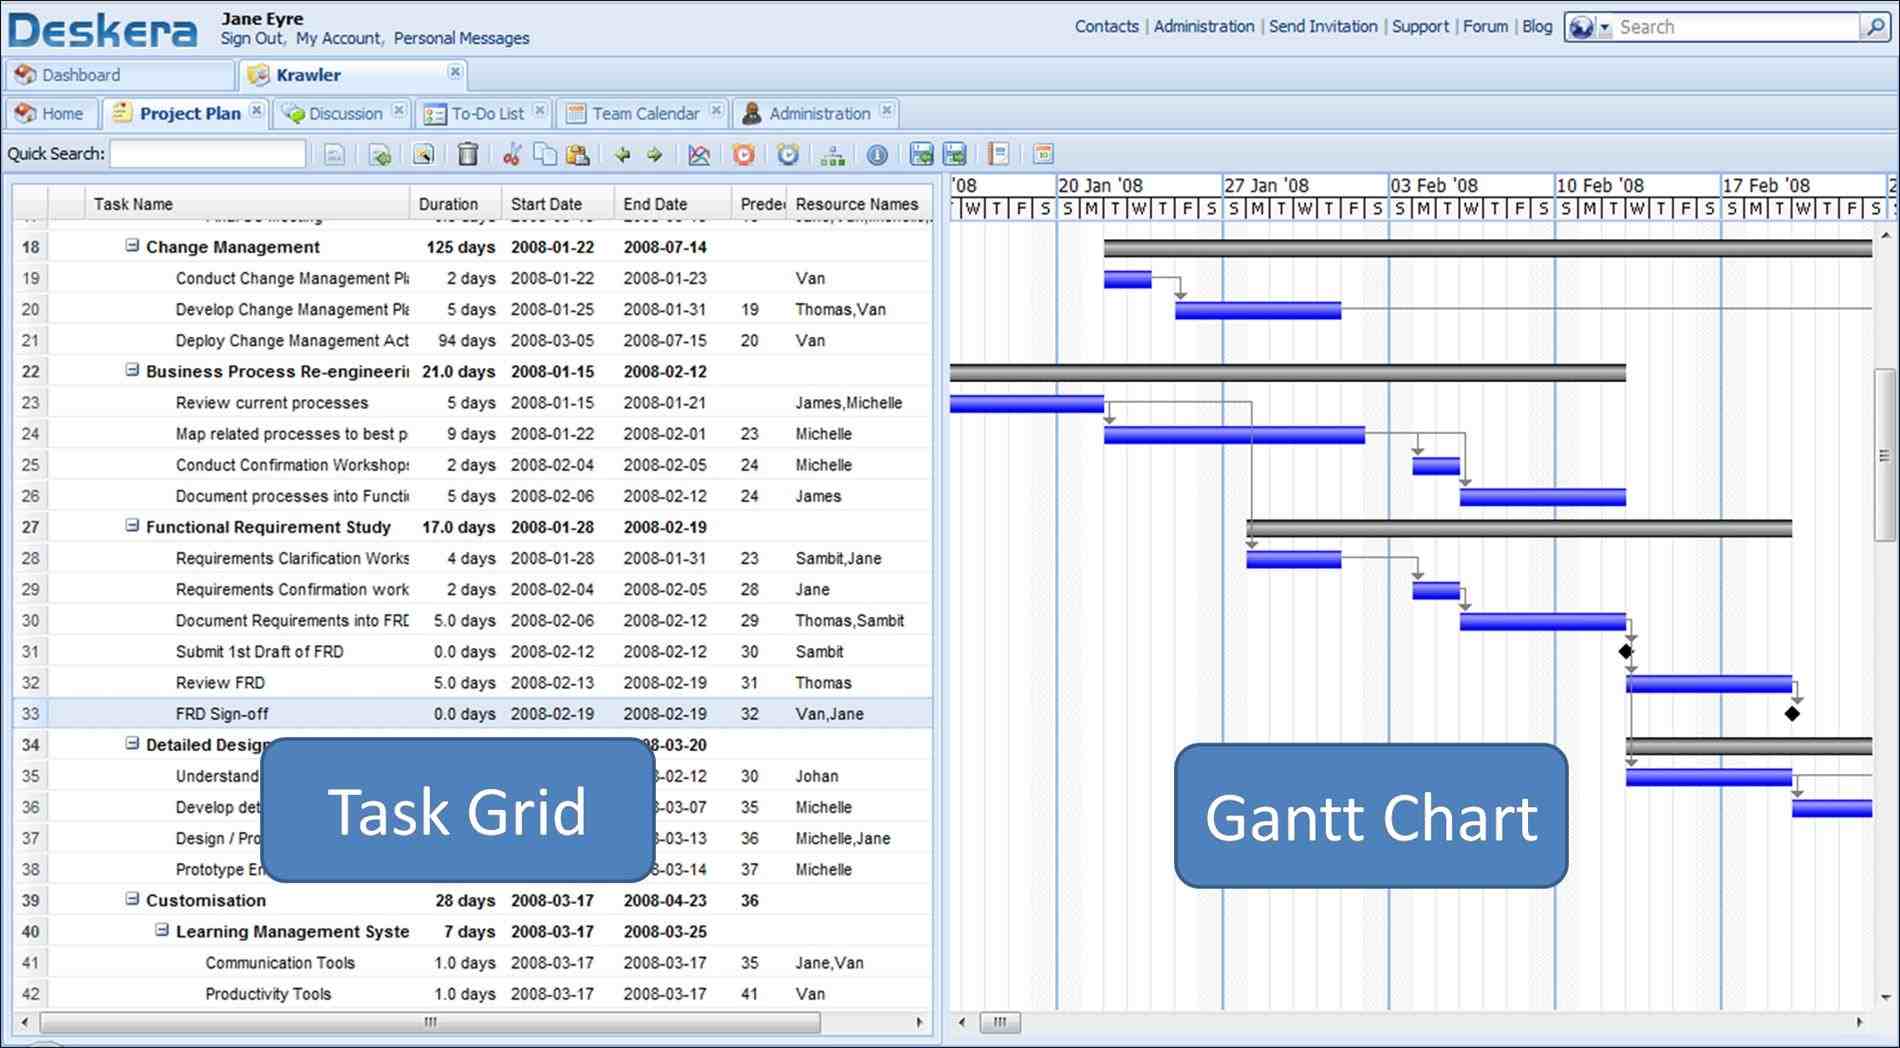 project Excel 2010 Project Plan Template planning template excel gantt chart image collections rhalramiinfo download management templates for rhprojectmanagersinncom download